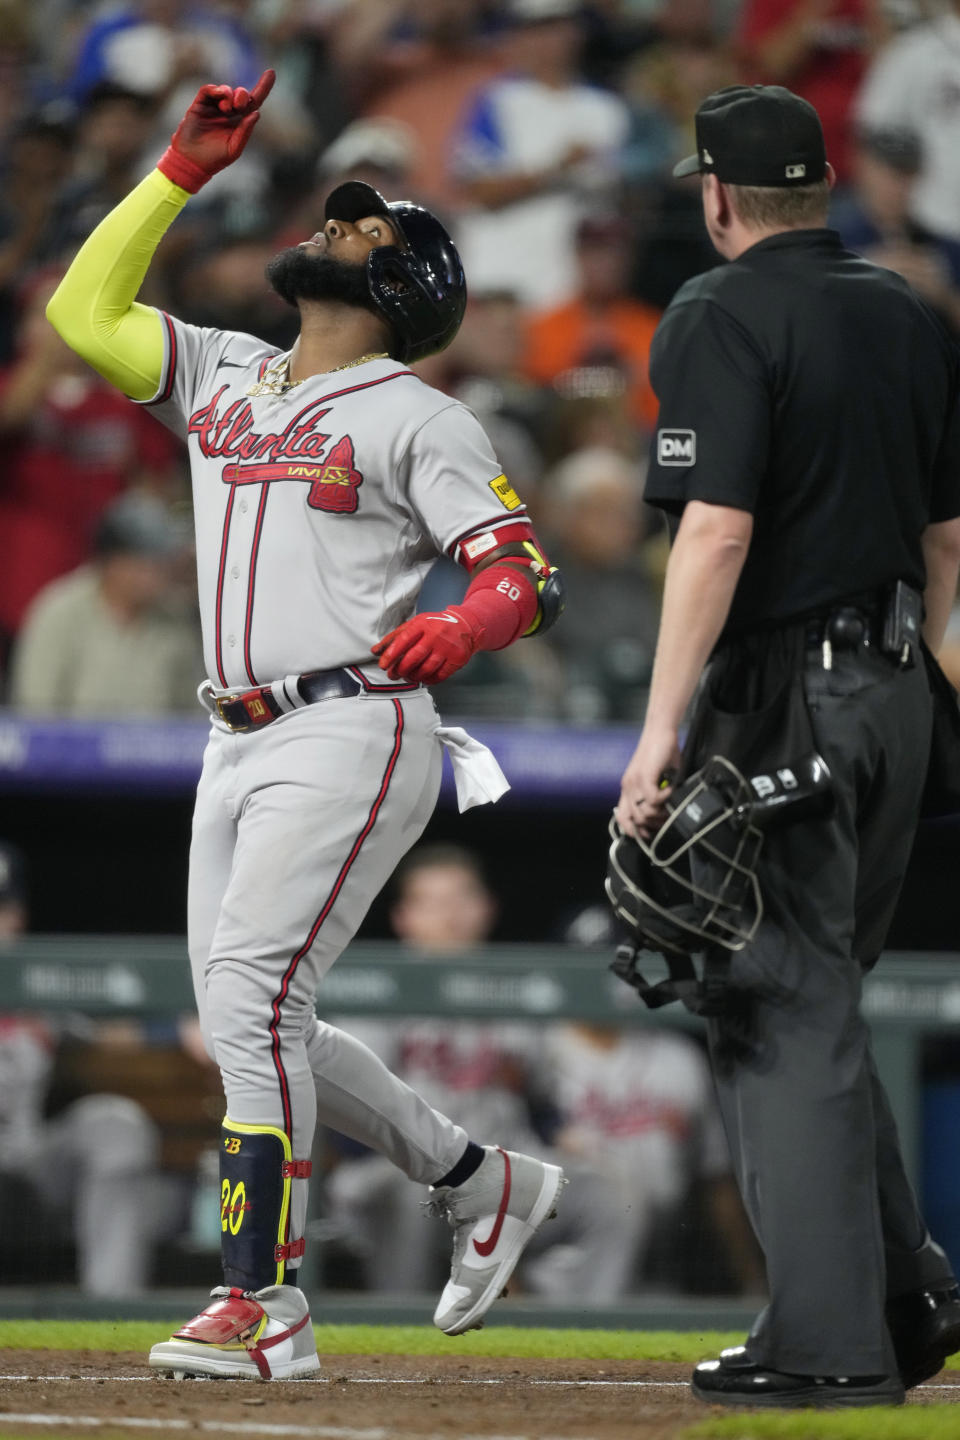 Atlanta Braves' Marcell Ozuna, left, gestures as he crosses home plate as home plate umpire Ryan Wills looks on in the sixth inning of a baseball game against the Colorado Rockies Wednesday, Aug. 30, 2023, in Denver. (AP Photo/David Zalubowski)